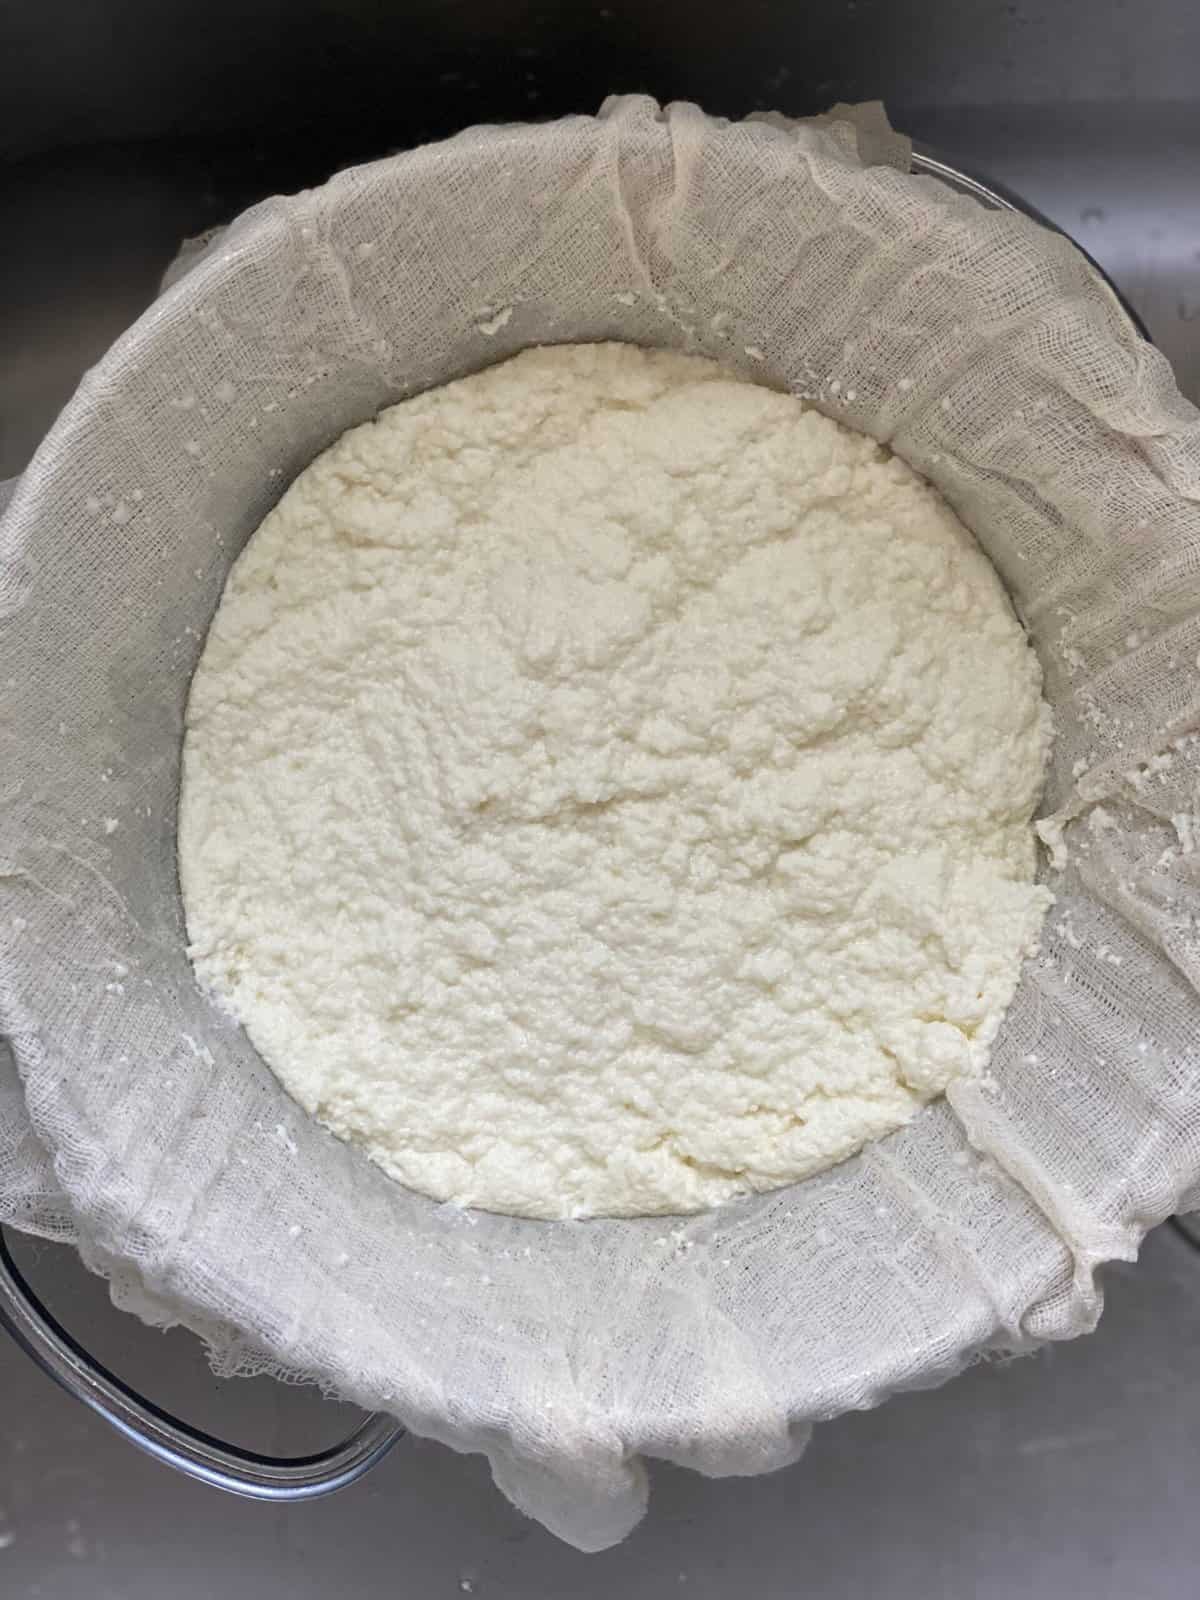 Homemade ricotta cheese sits on top of a cheesecloth.